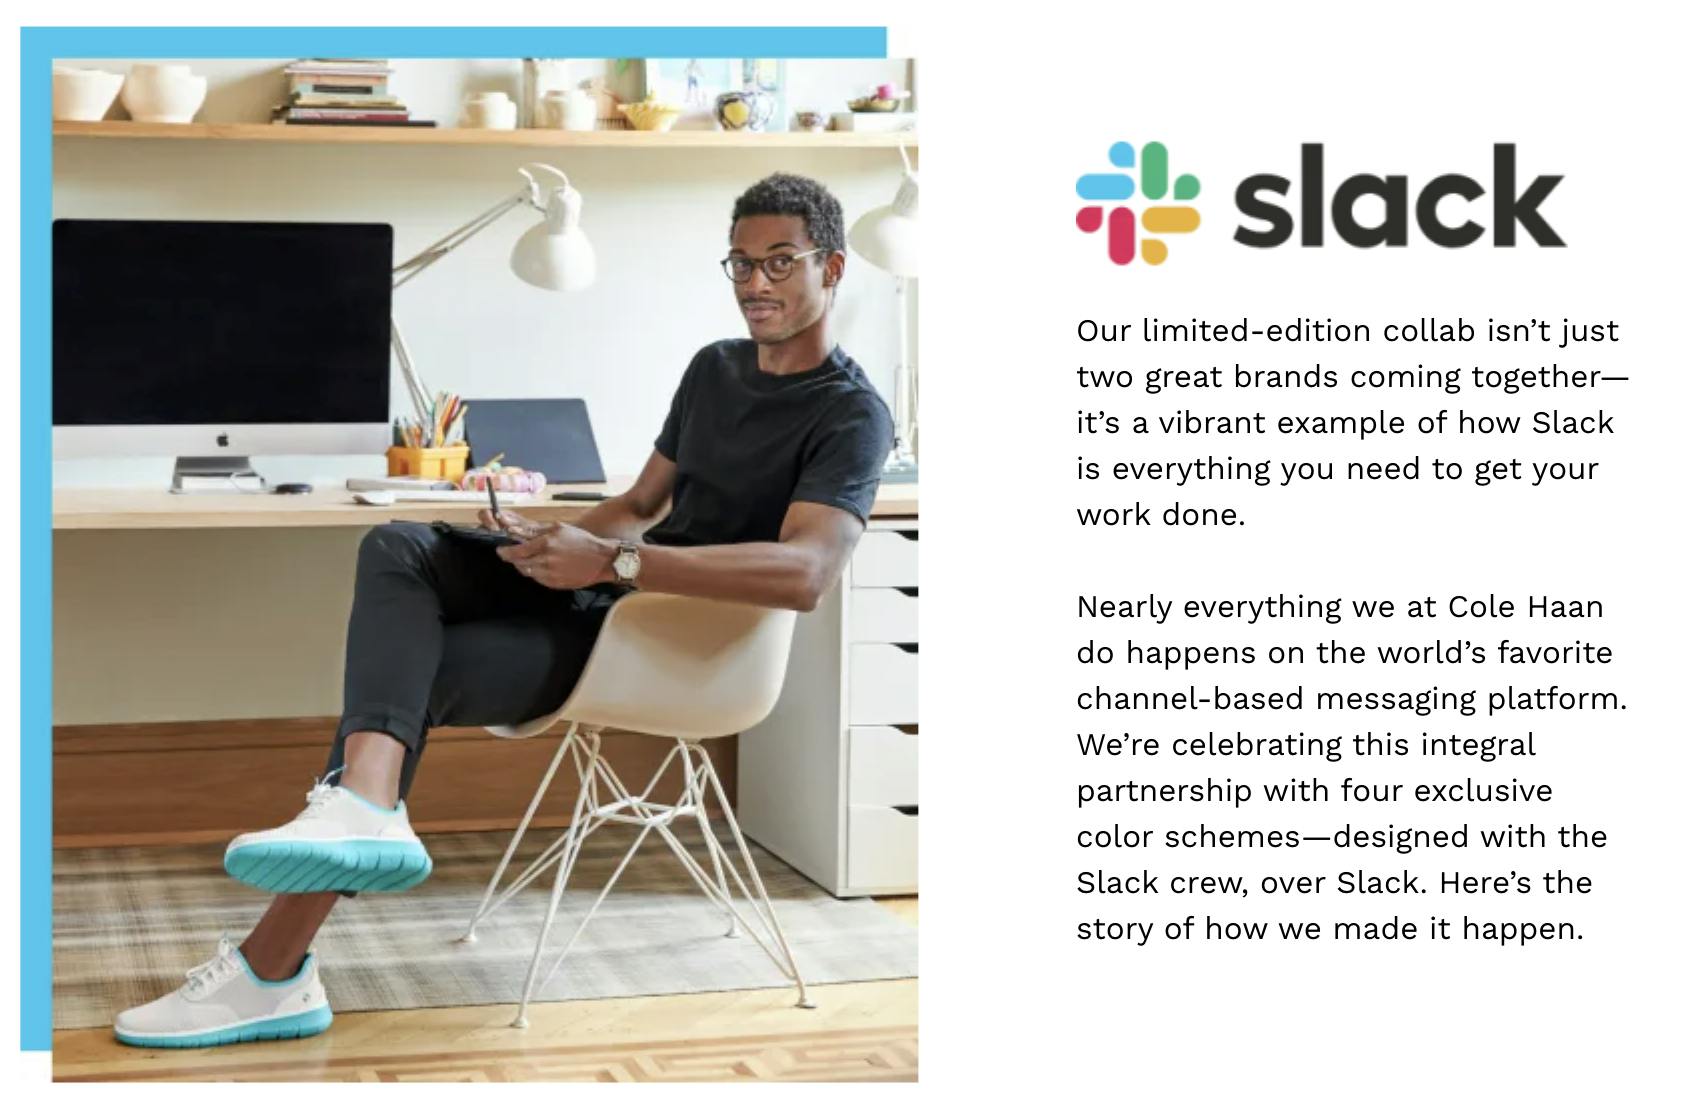 slack and cole haan partnership example